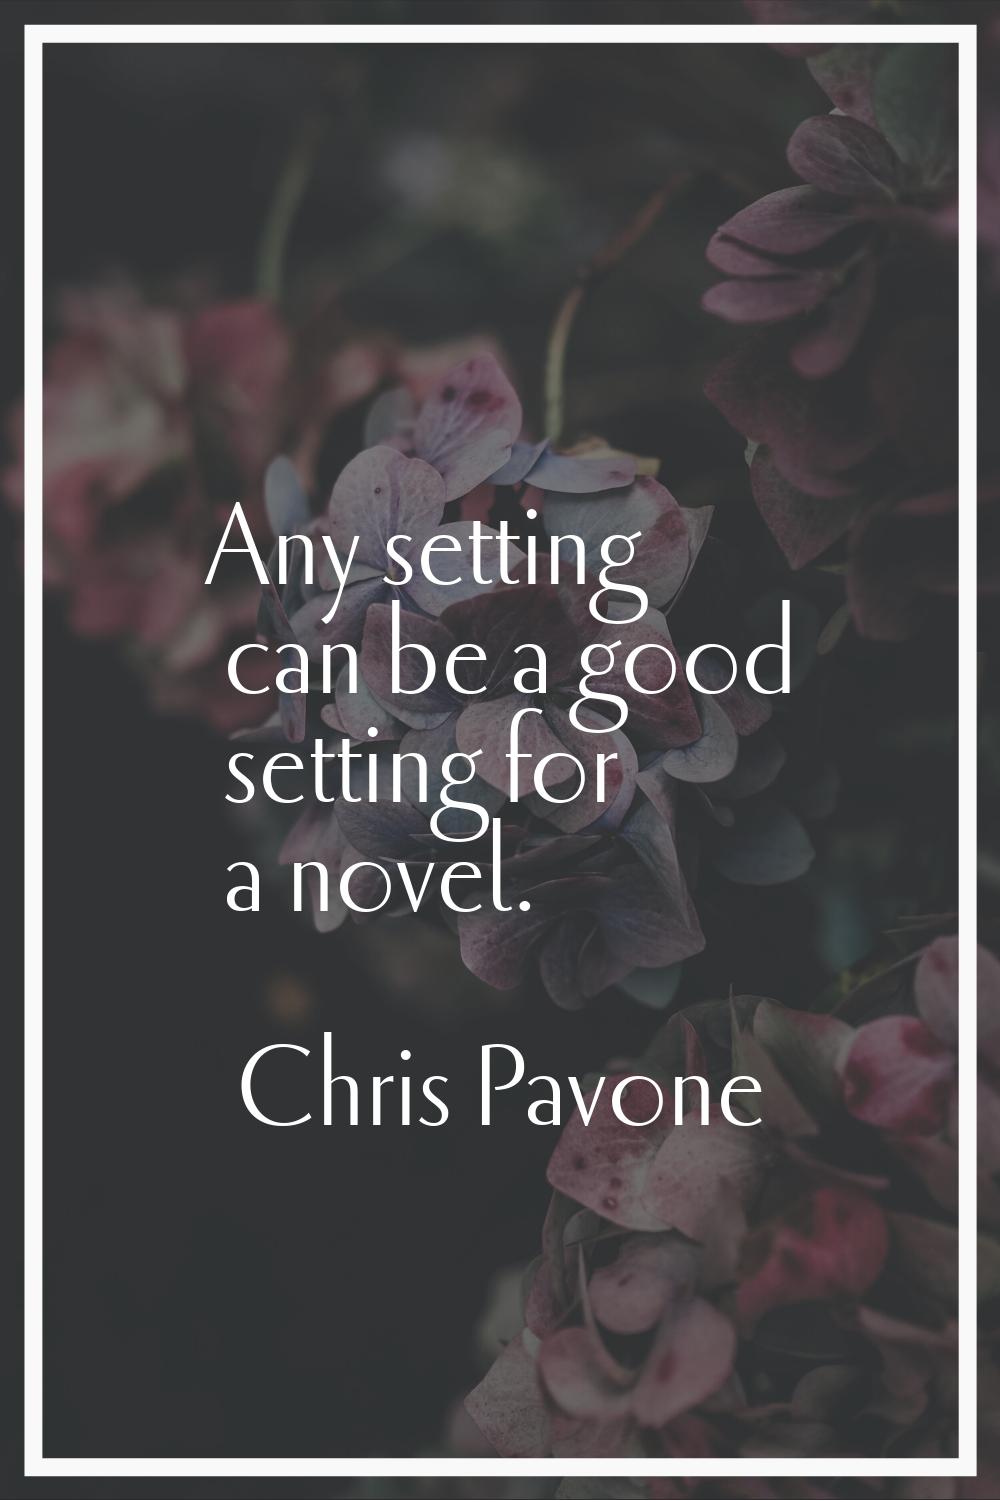 Any setting can be a good setting for a novel.